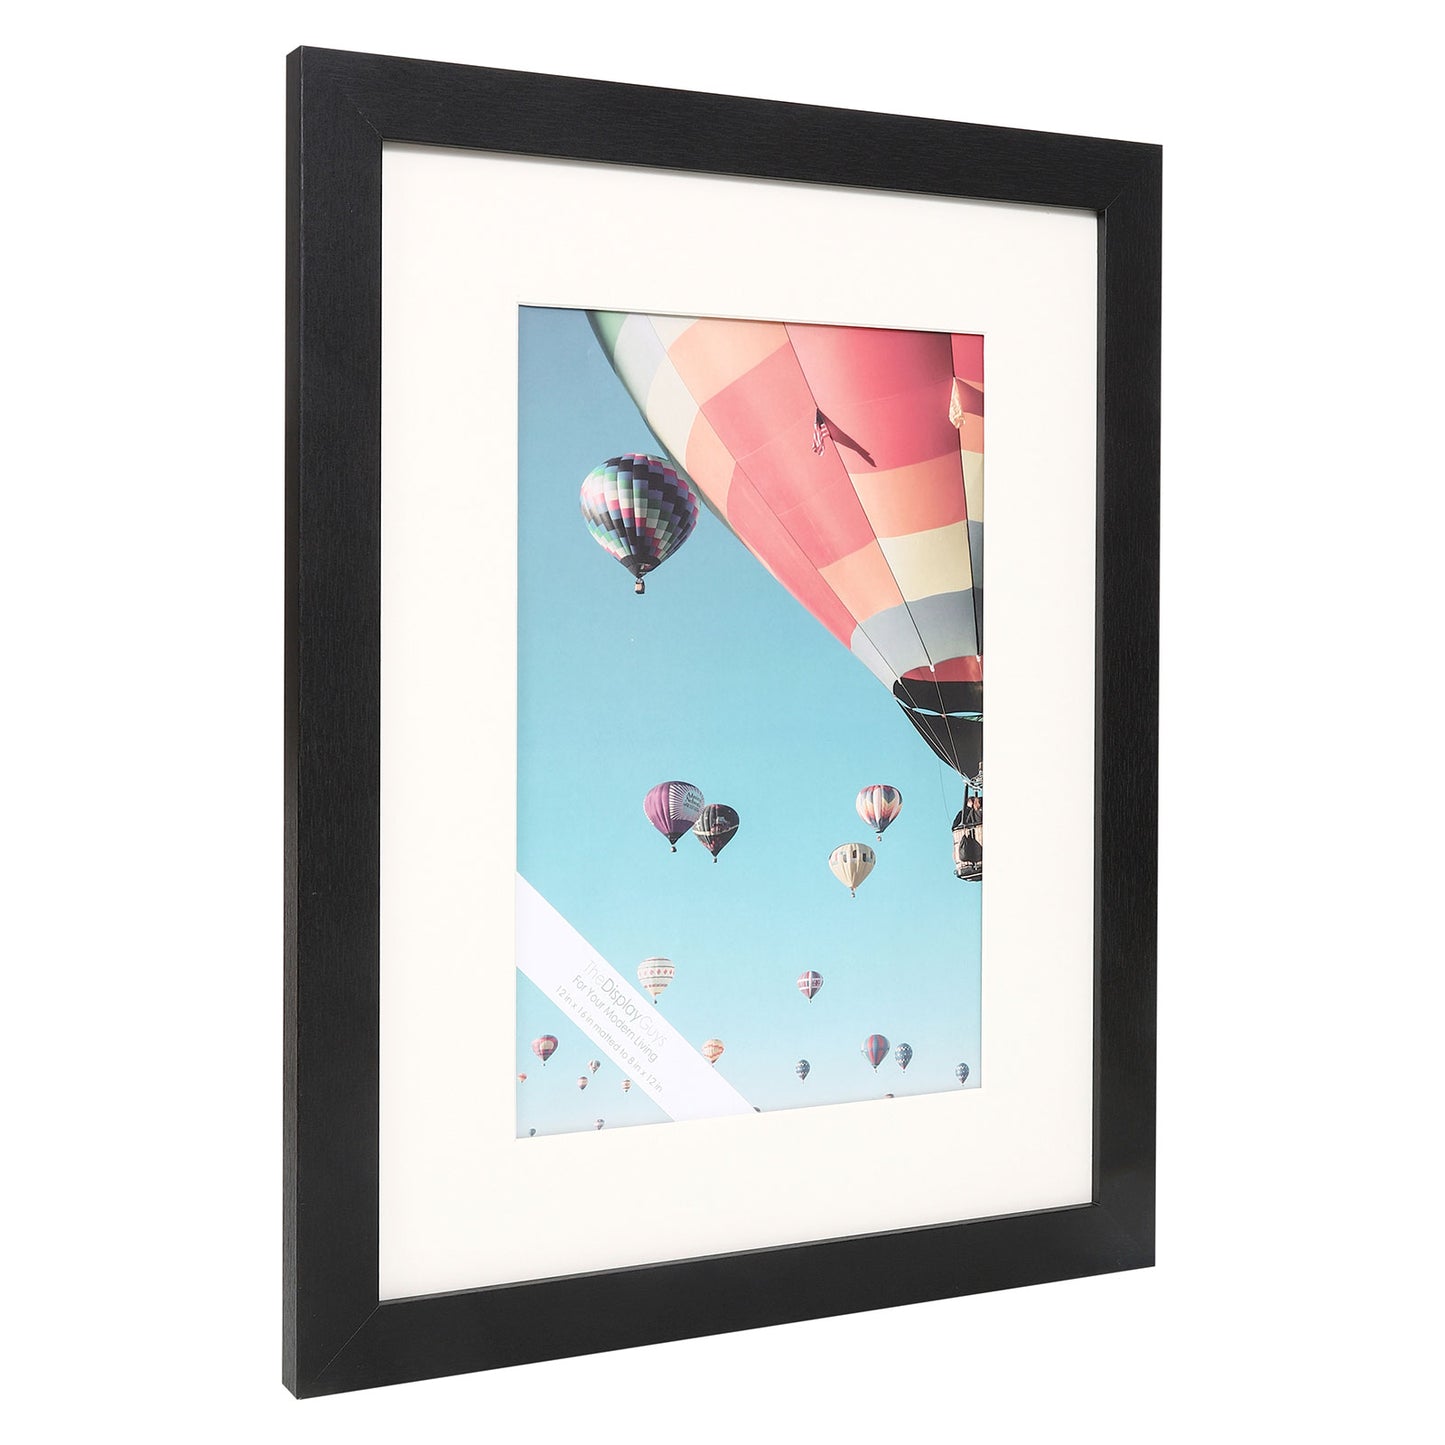 12" x 16" Black MDF Wood Picture Frame with Tempered Glass, 8" x 12" Matted